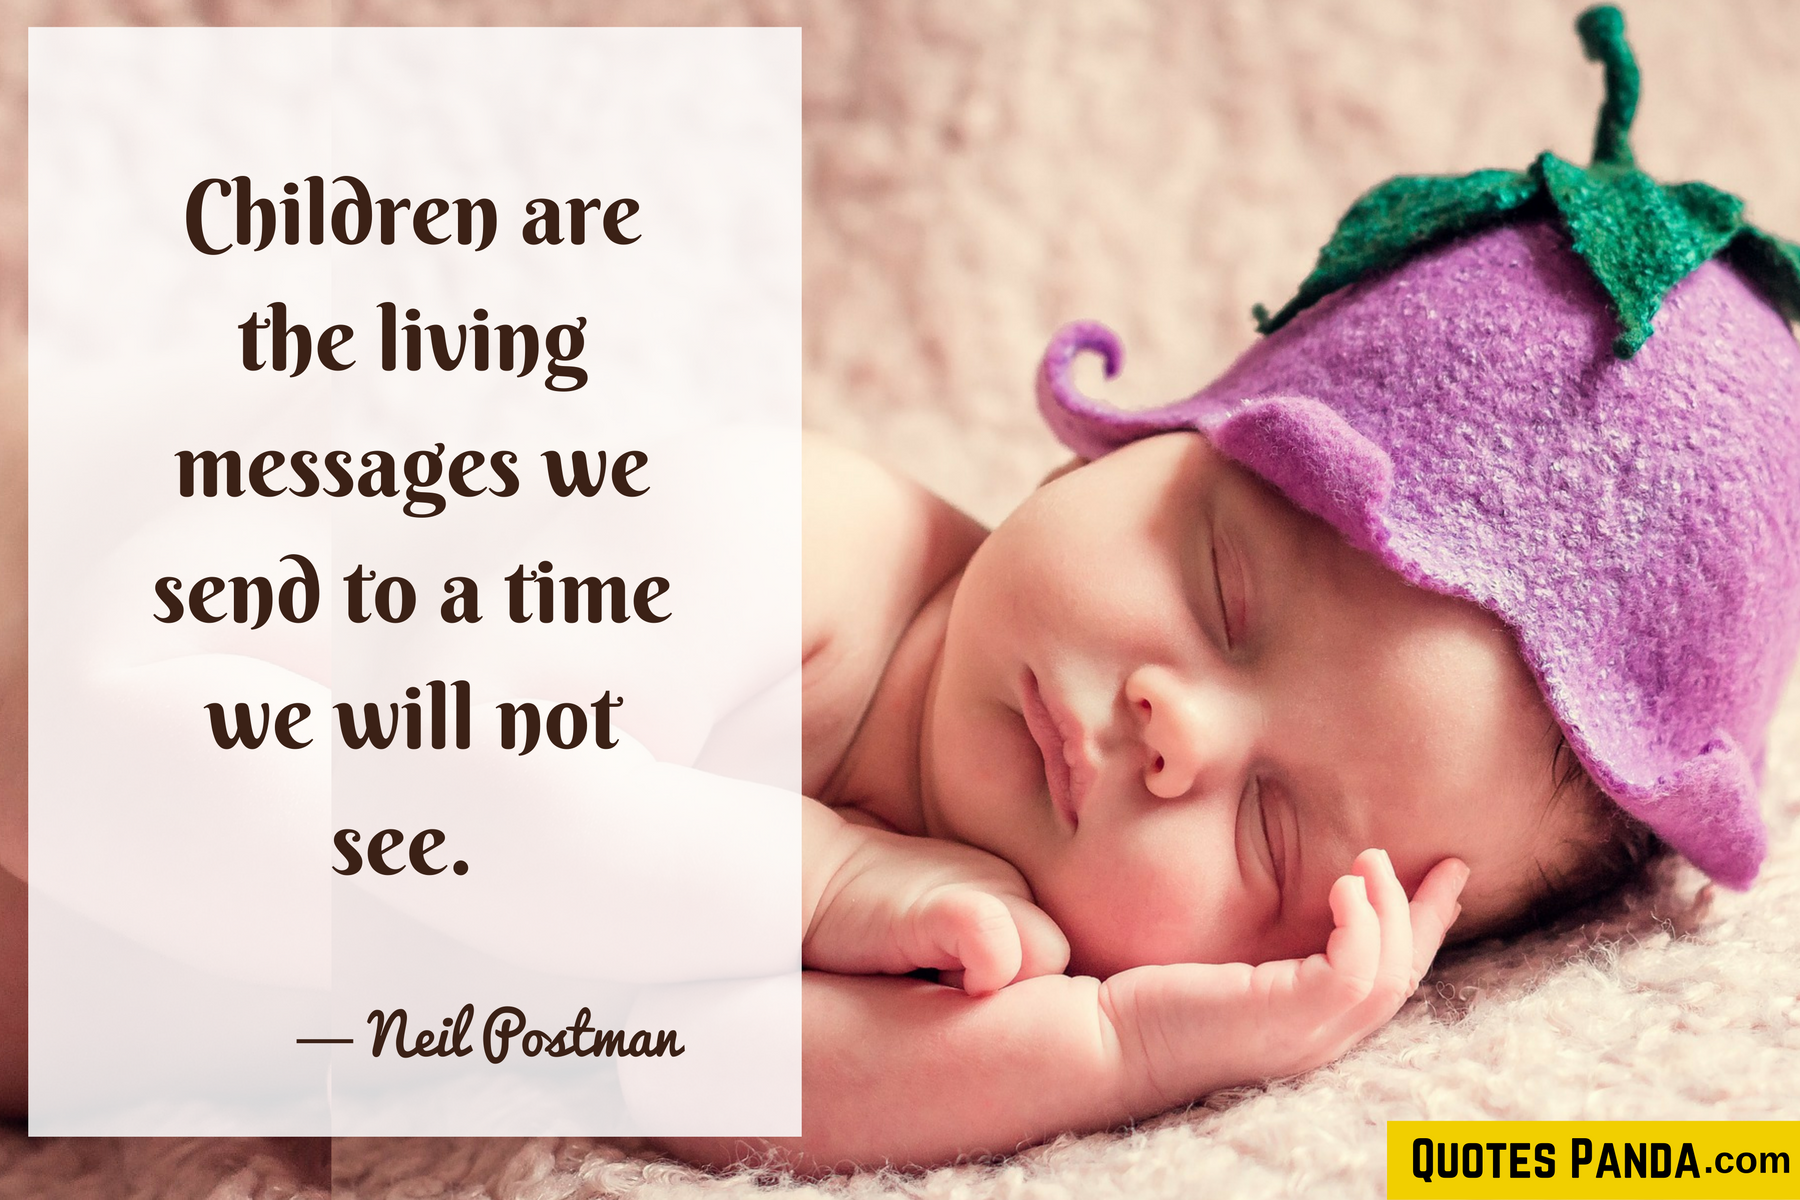 Top 10 Quotes On Children for Children’s Day: 2022<